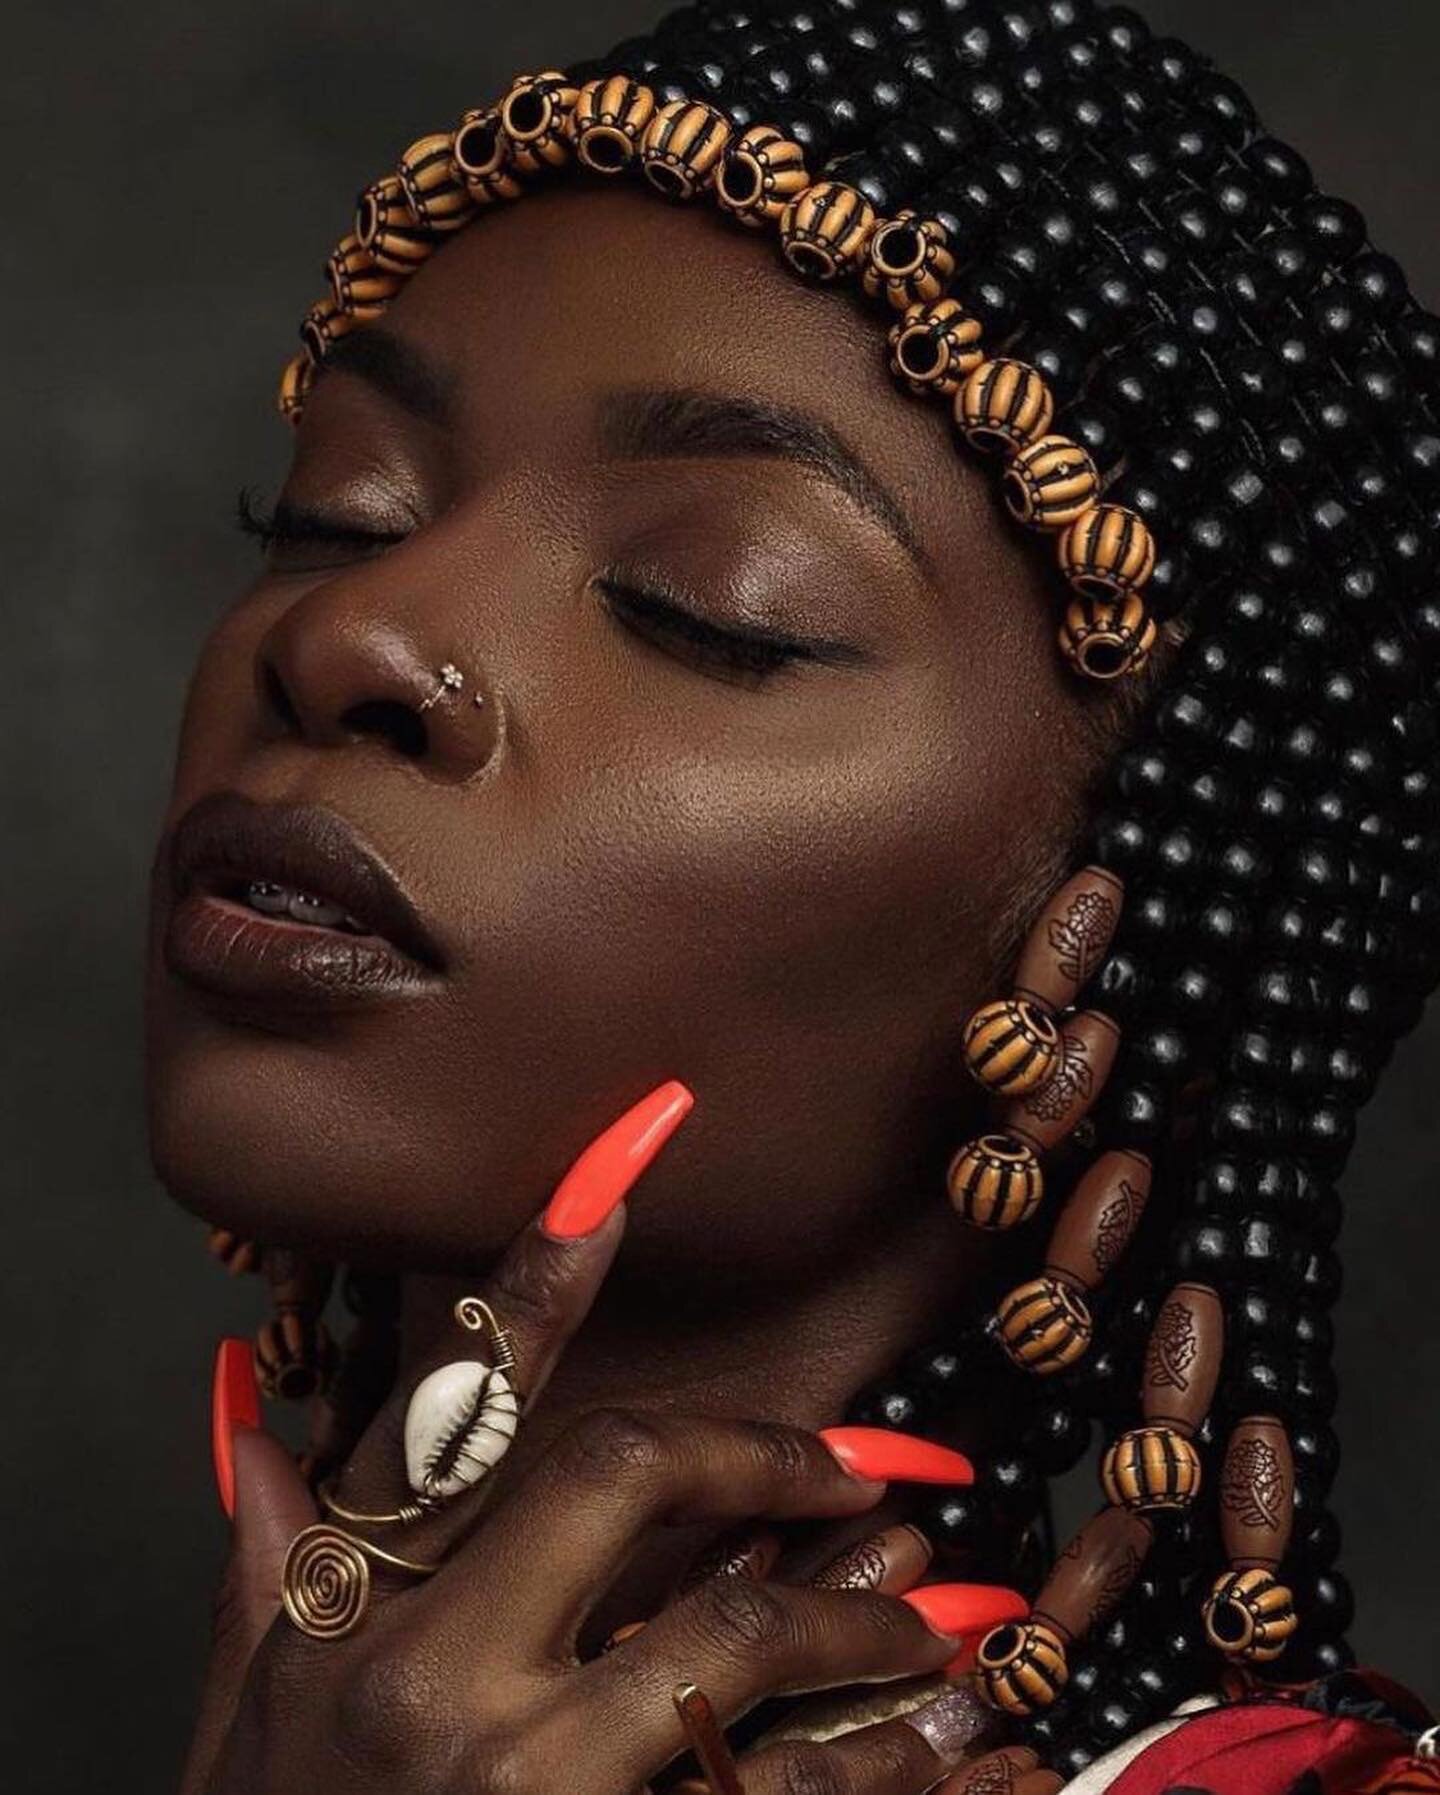 Posted @withregram &bull; @trufacebygrace Pigment like the earth , skin is just pearls 🤎 caption from Queen @marvie_themodel 
.
Buy headpiece now

Shot/Edited: @__pix7 
Jewelry: @trufacebygrace